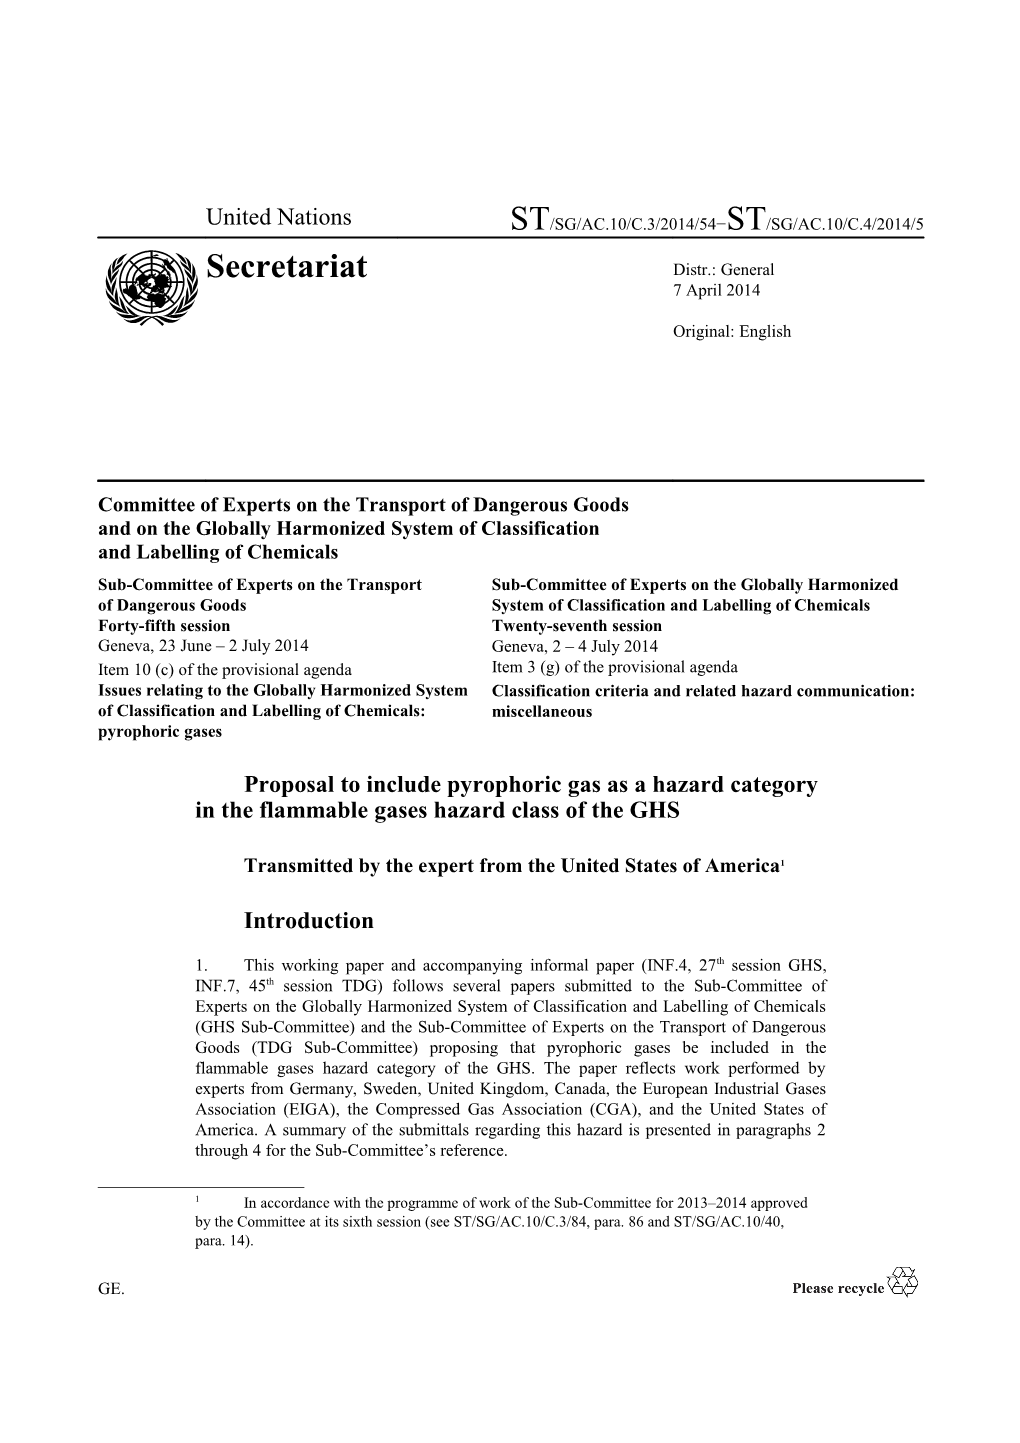 Committee of Experts on the Transport of Dangerous Goods and on the Globally Harmonized s1